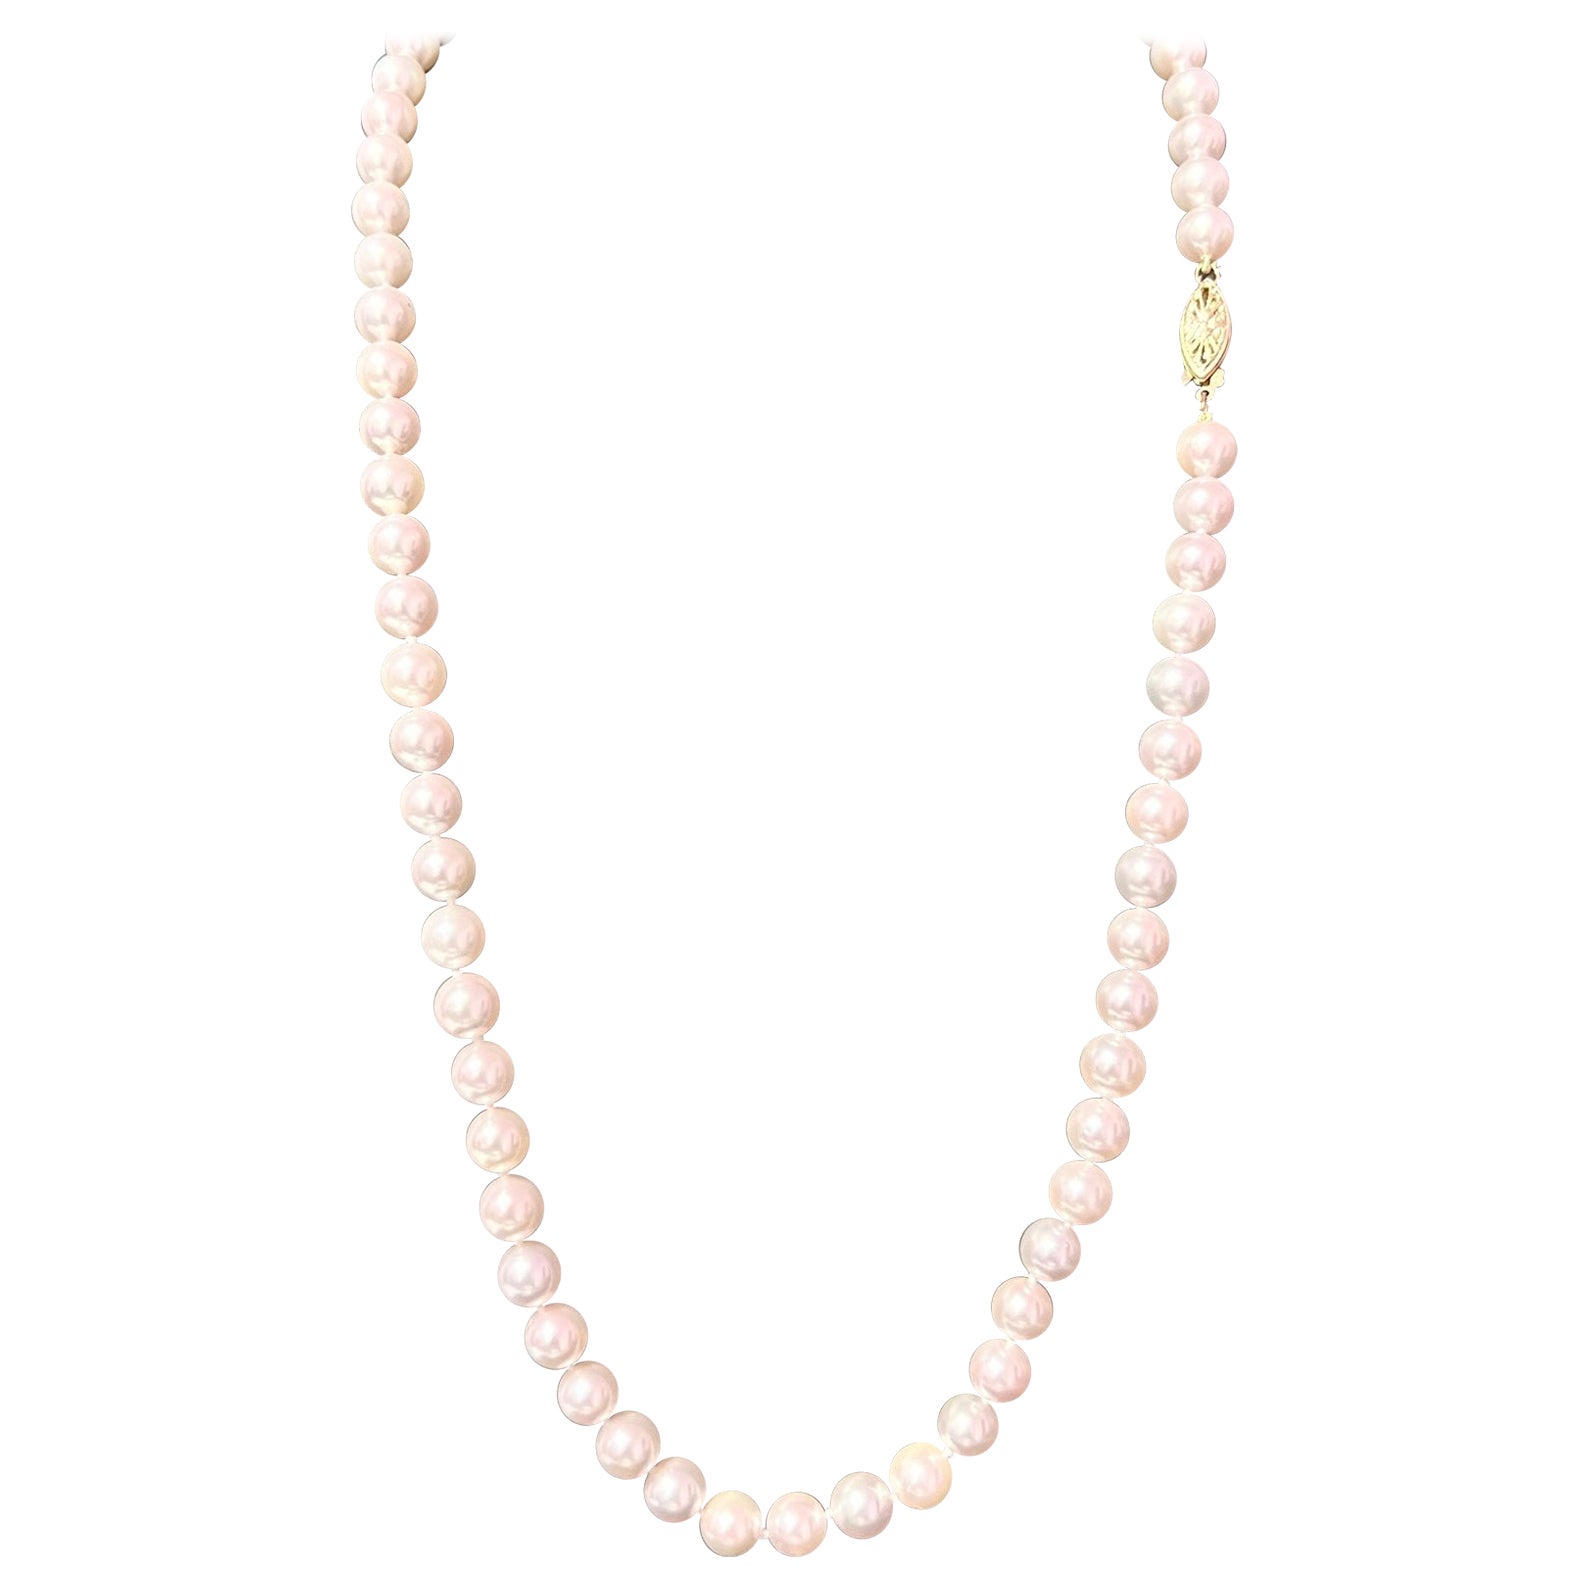 Akoya Pearl Necklace 24" 14k Y Gold 8 mm